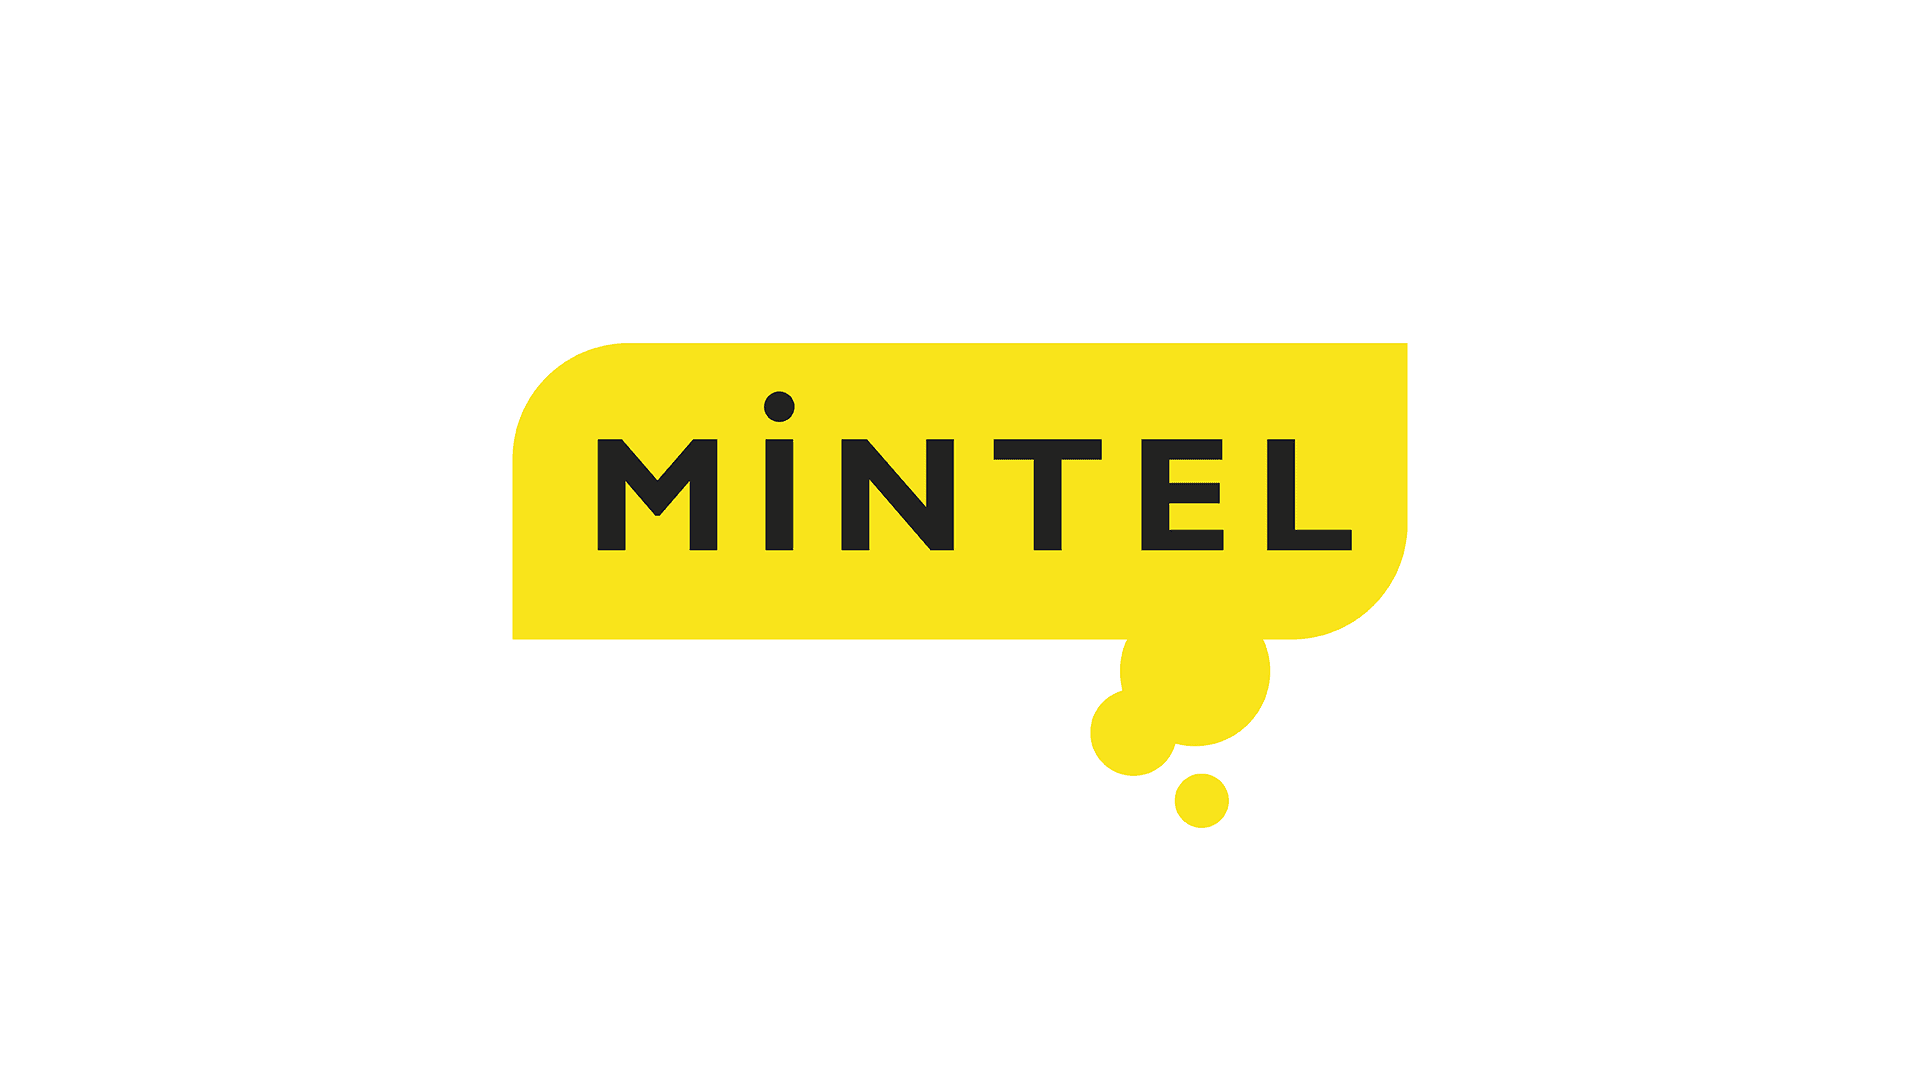 The Mintel logo in black text inside a yellow thought bubble